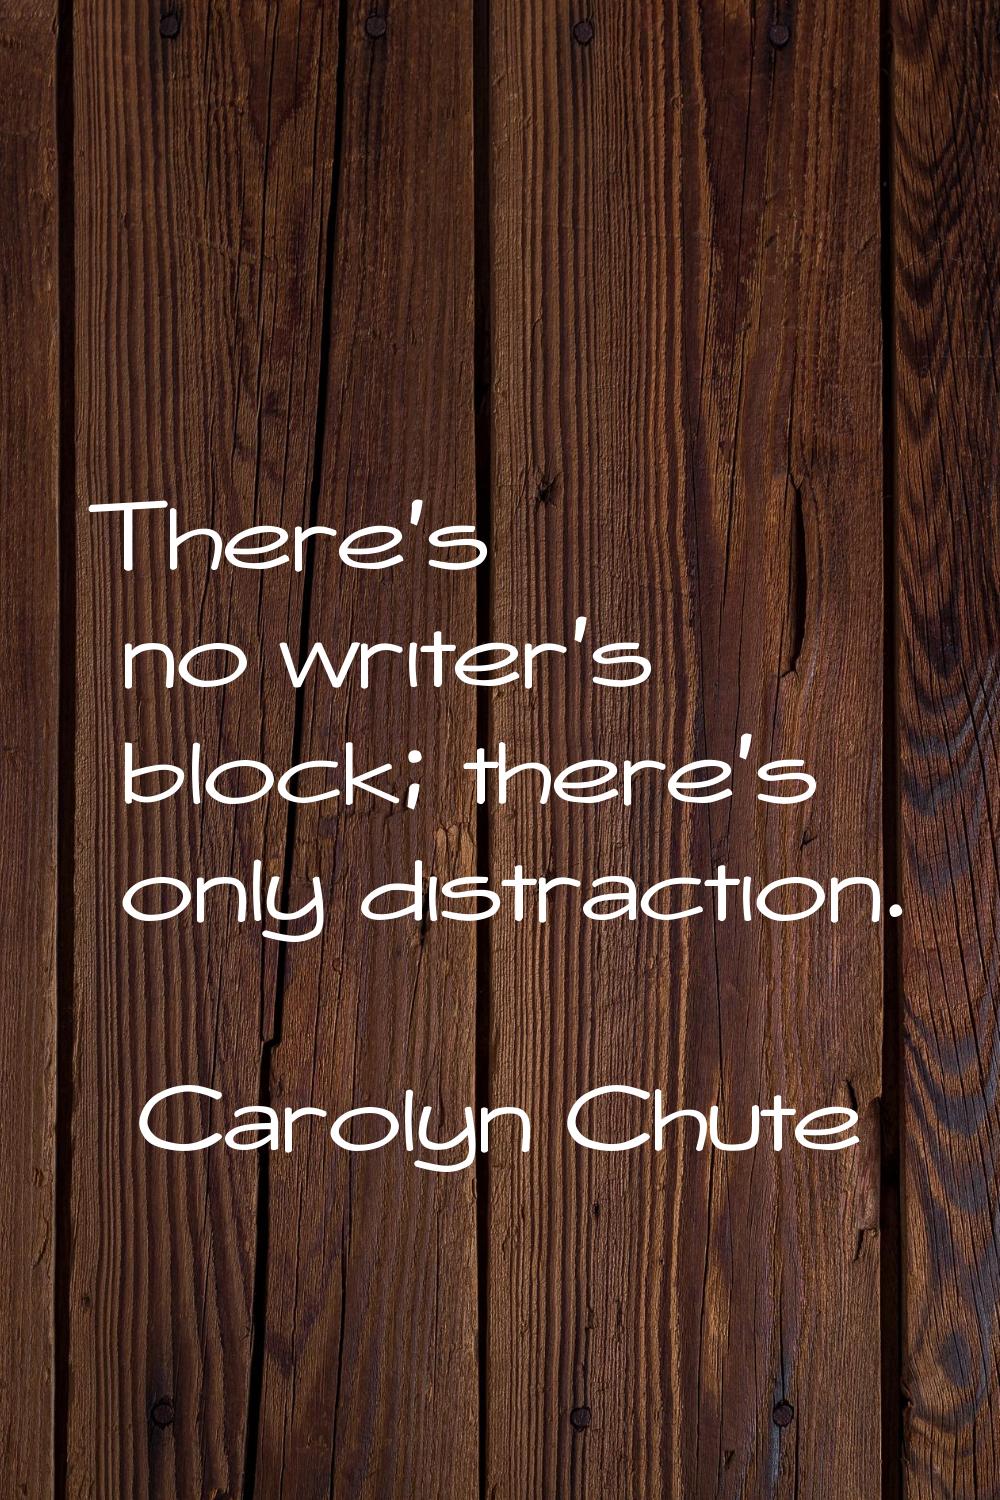 There's no writer's block; there's only distraction.